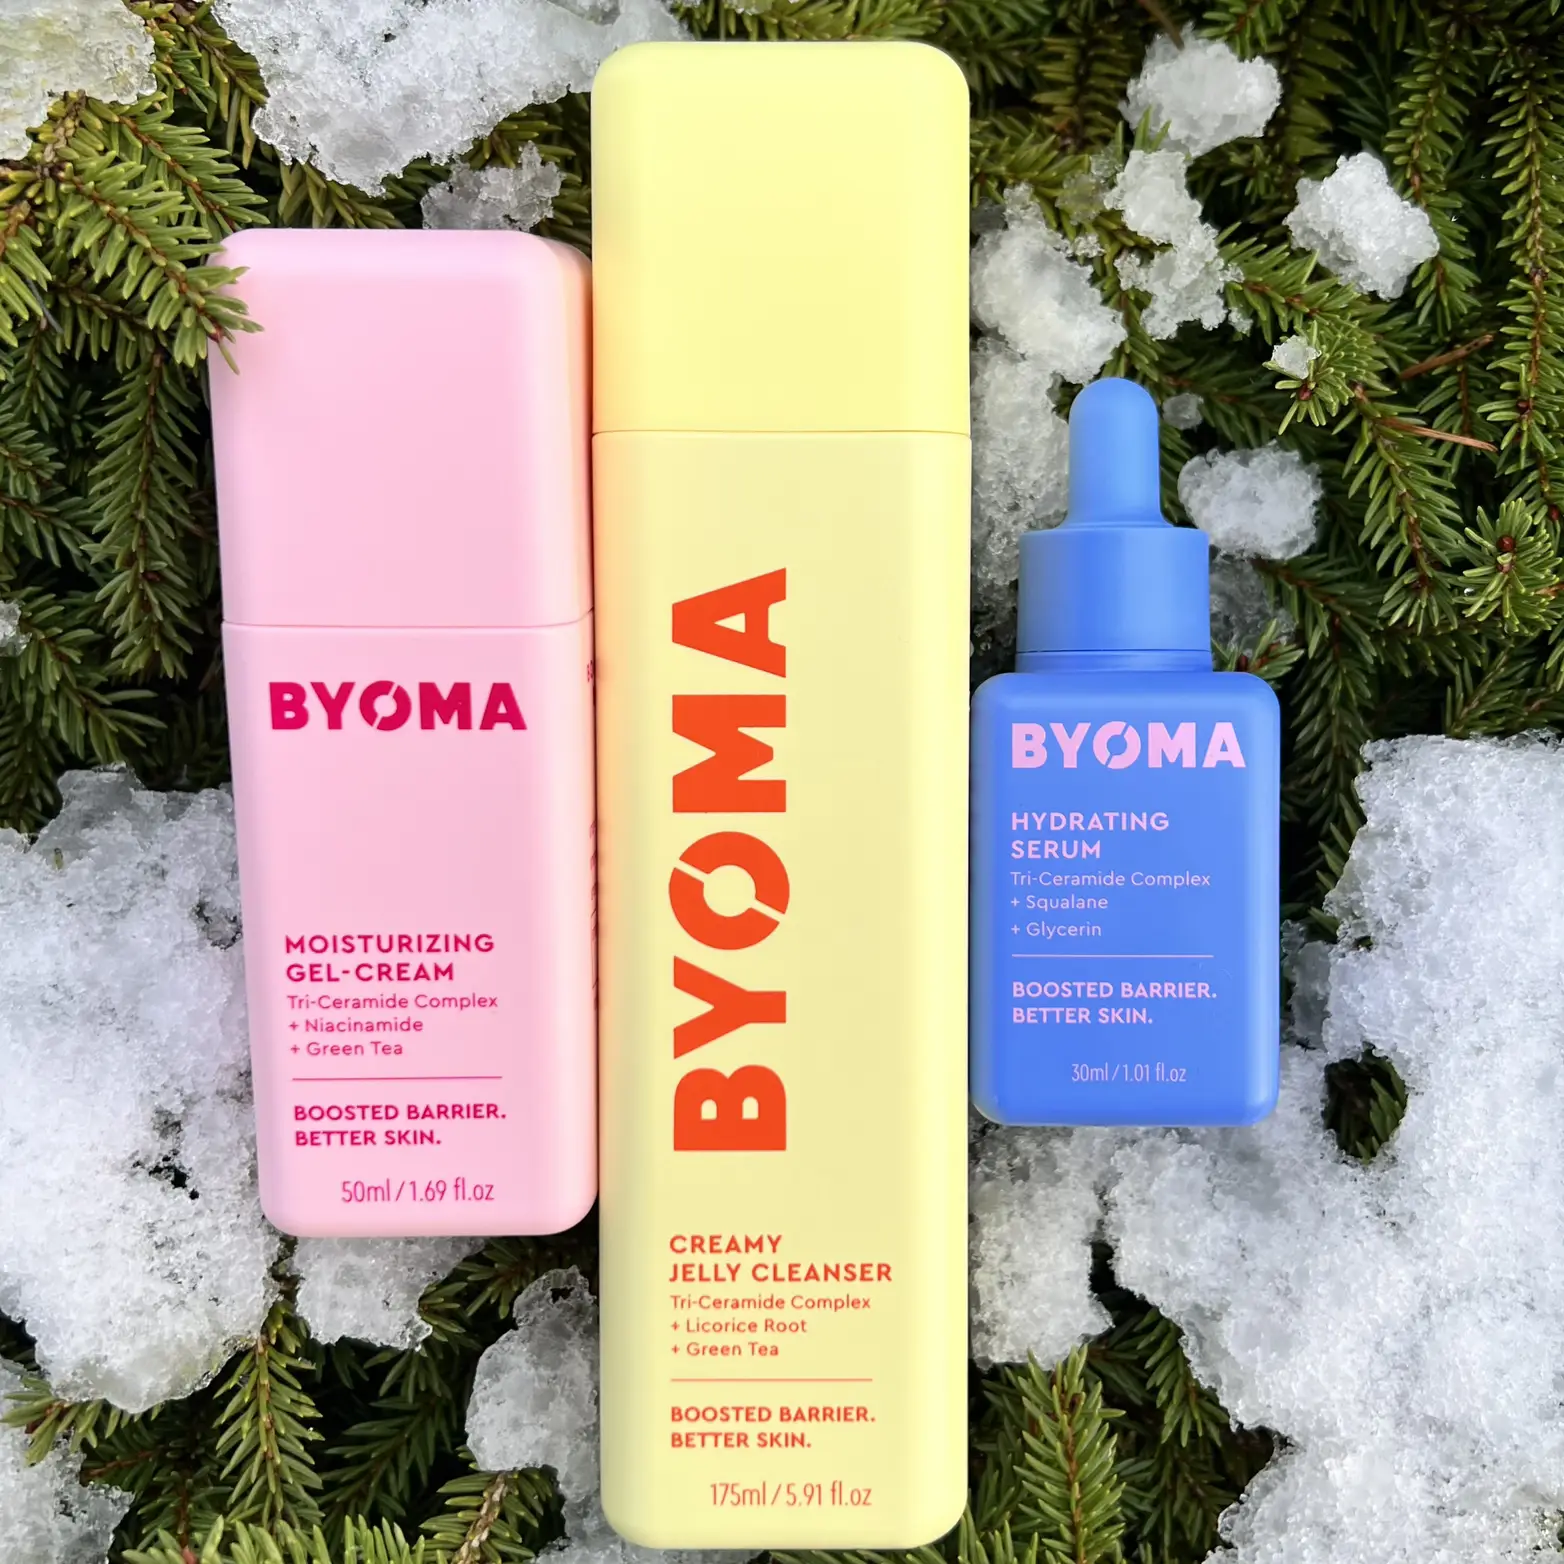 Byoma: skincare under $20, Gallery posted by Meaninginmakeup